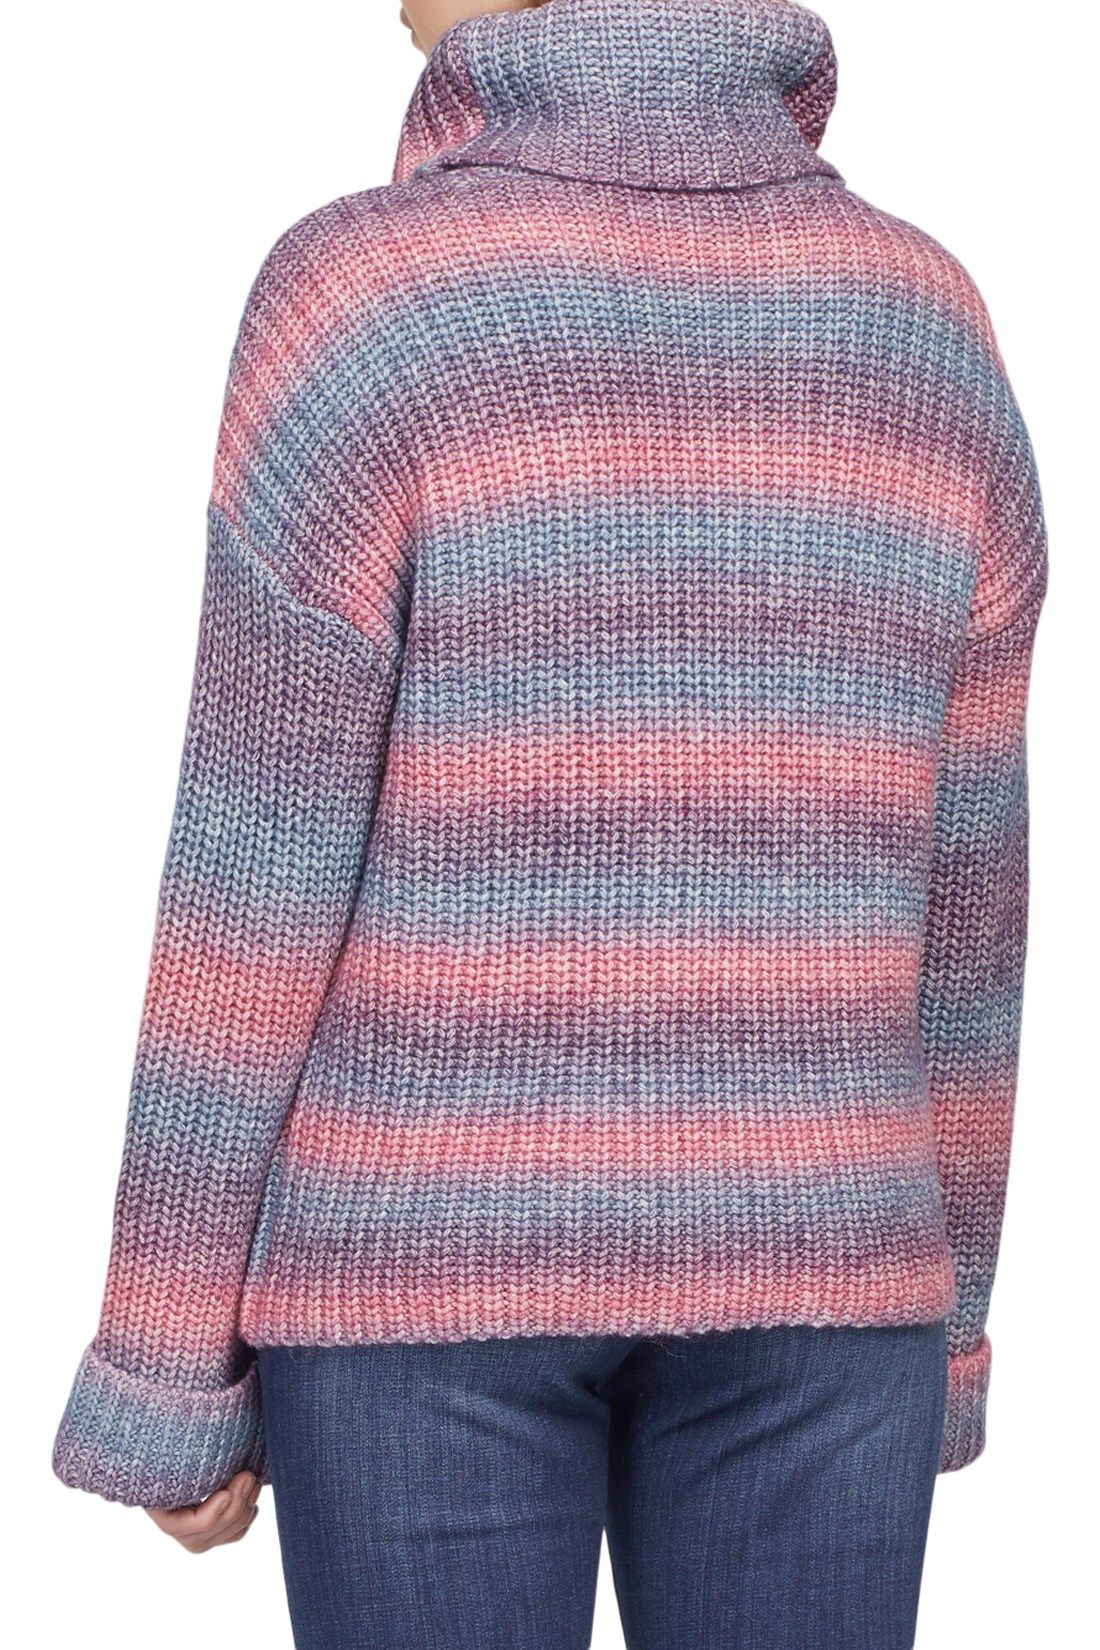 Women's Tribal Jeans | Striped Cowl Neck Sweater | Blue Frosting